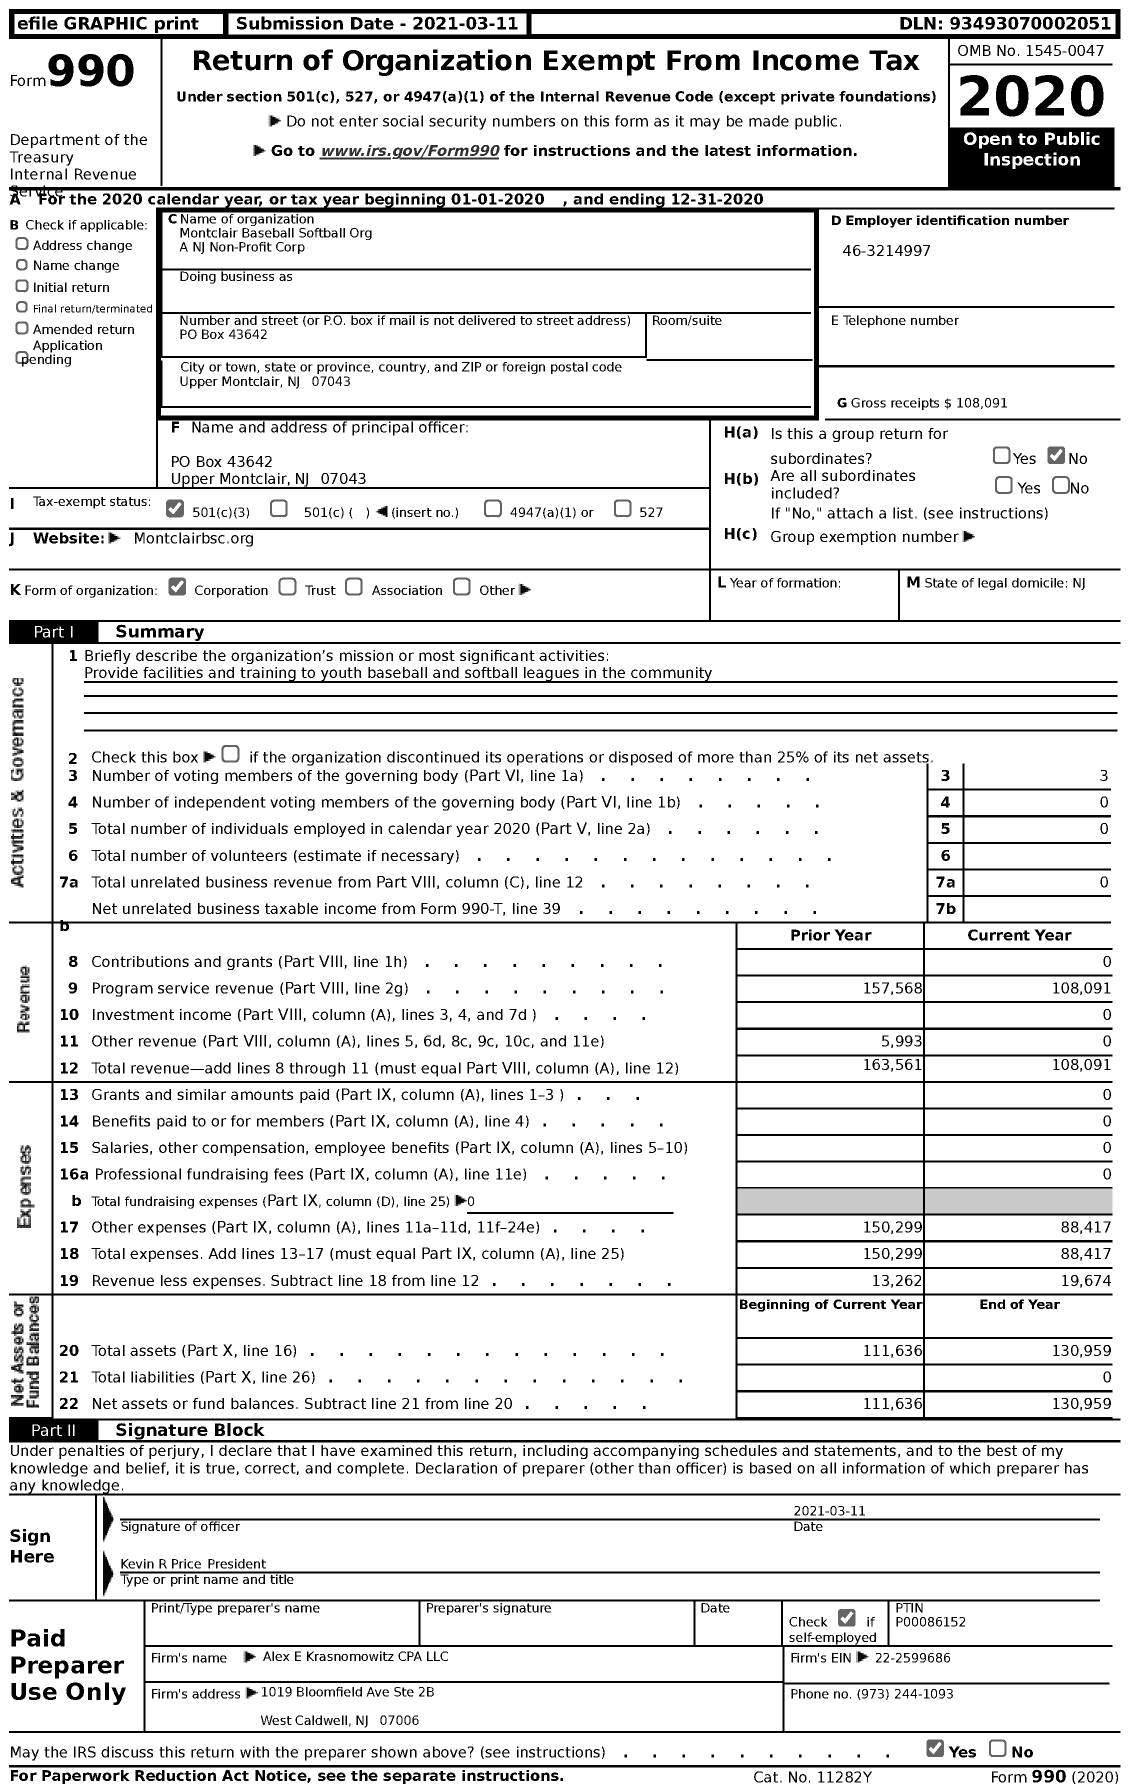 Image of first page of 2020 Form 990 for Montclair Baseball Softball Org A NJ Non-Profit Corp